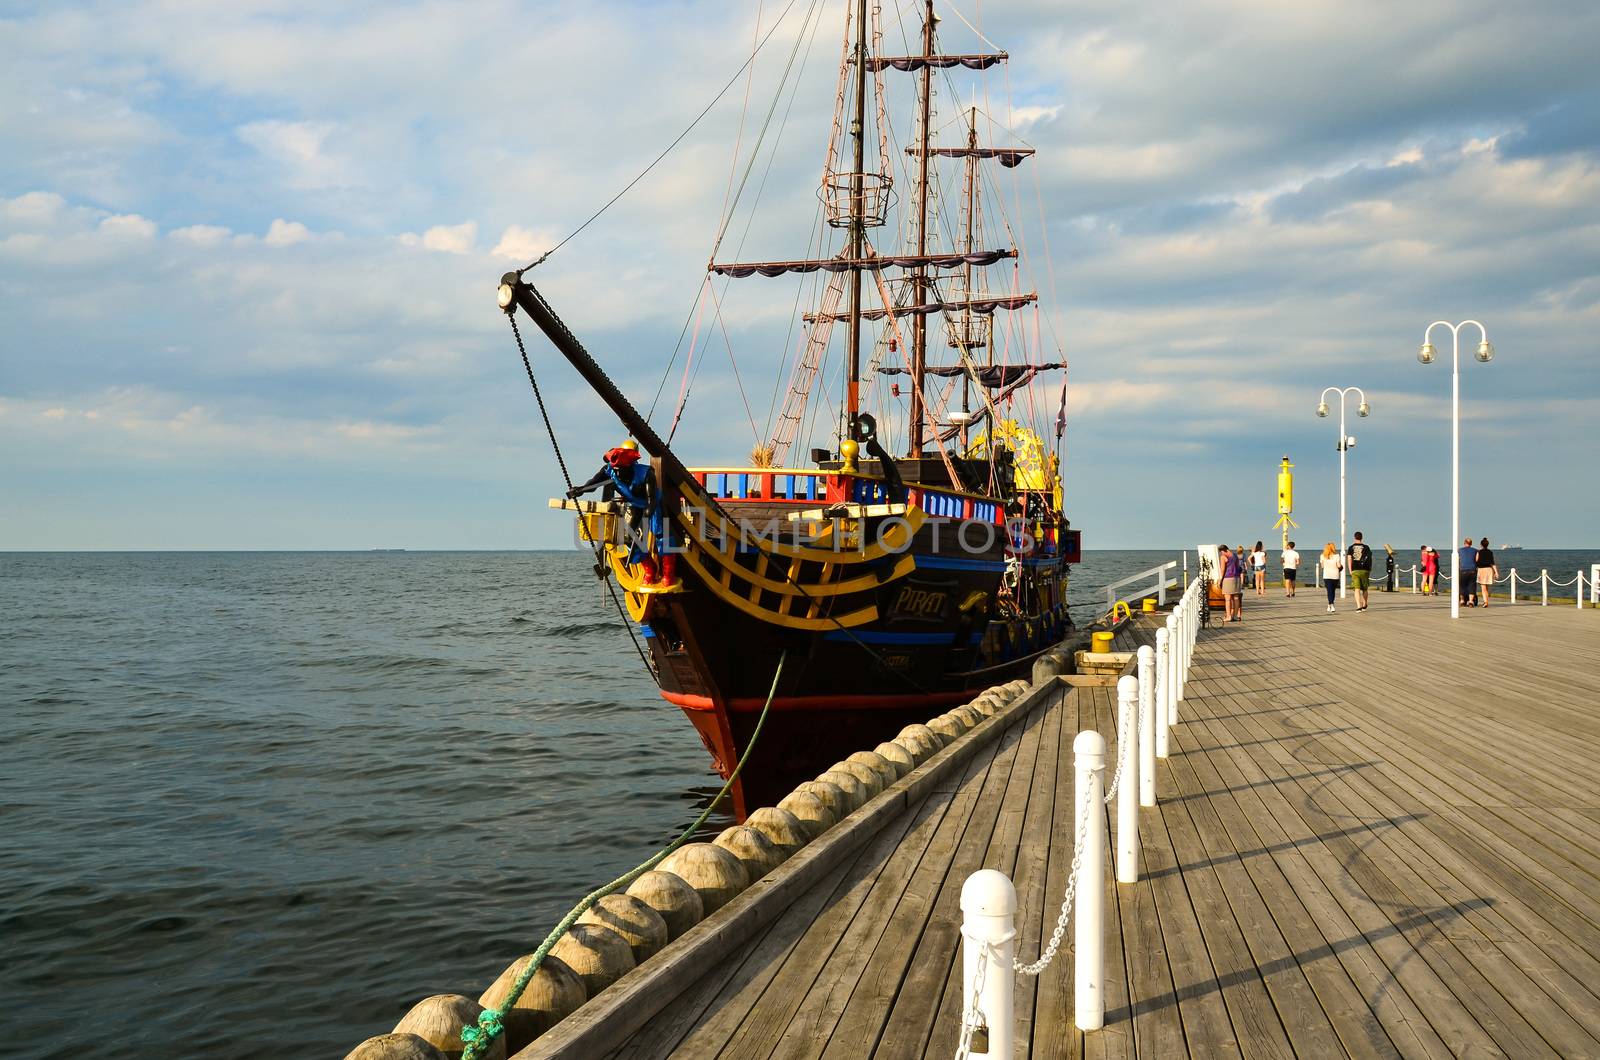 Sopot-Poland June-2016 Summer pirate cruise ship waiting for tourist before next sailing .